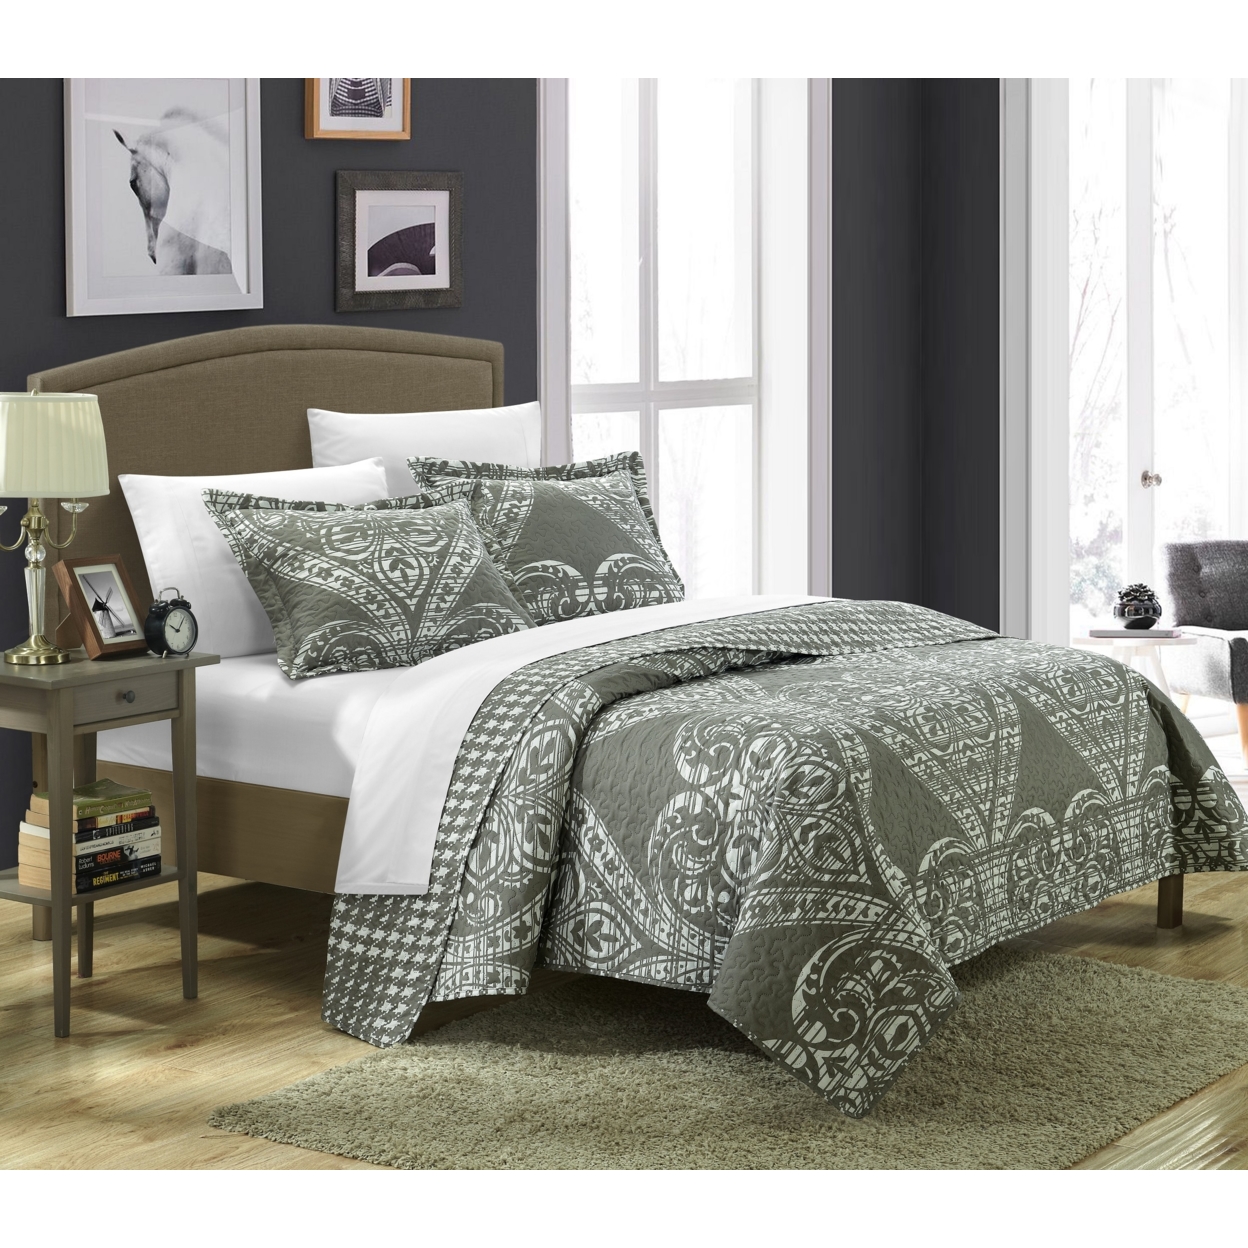 3 Or 2 Piece Revenna REVERSIBLE Printed Quilt Set. Front A Traditional Pattern And Reverses Into A Houndstooth Pattern - Silver, Queen